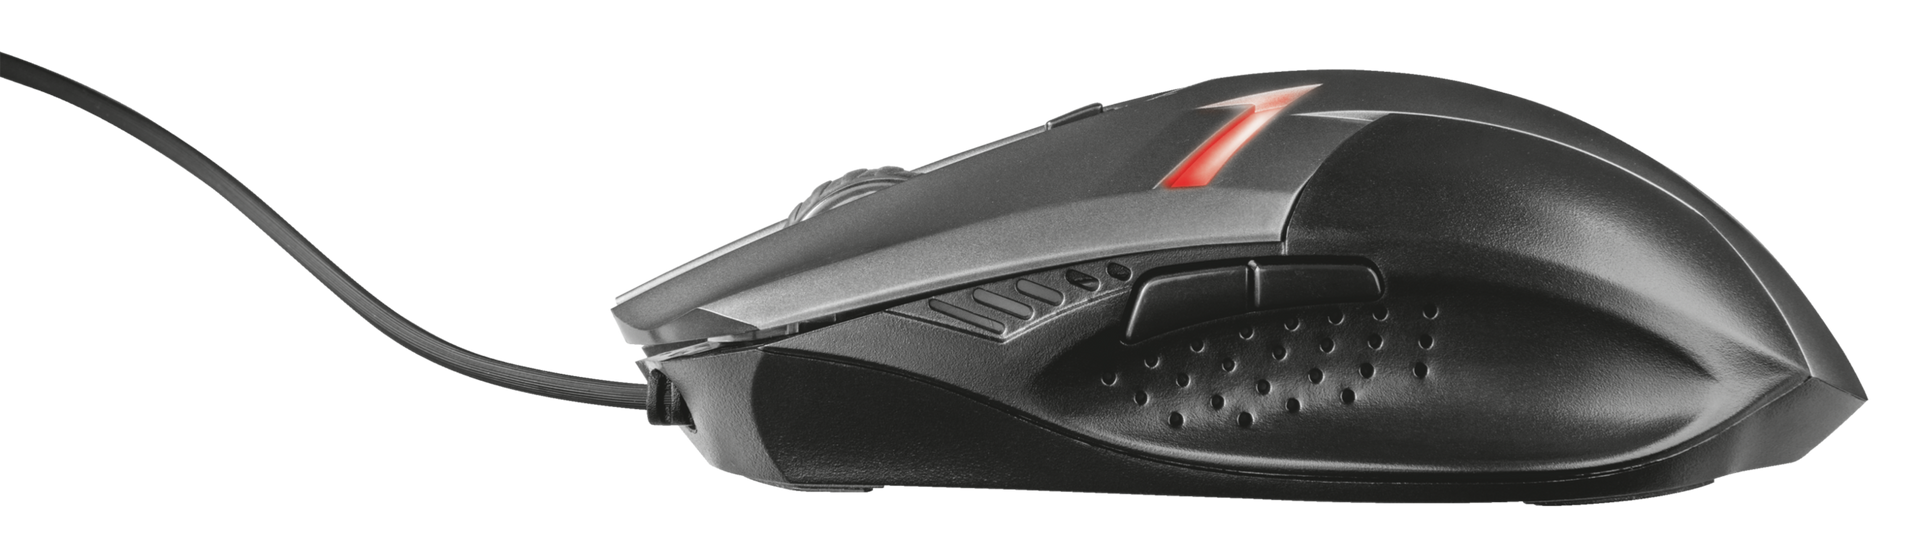 Ziva Gaming Mouse-Side